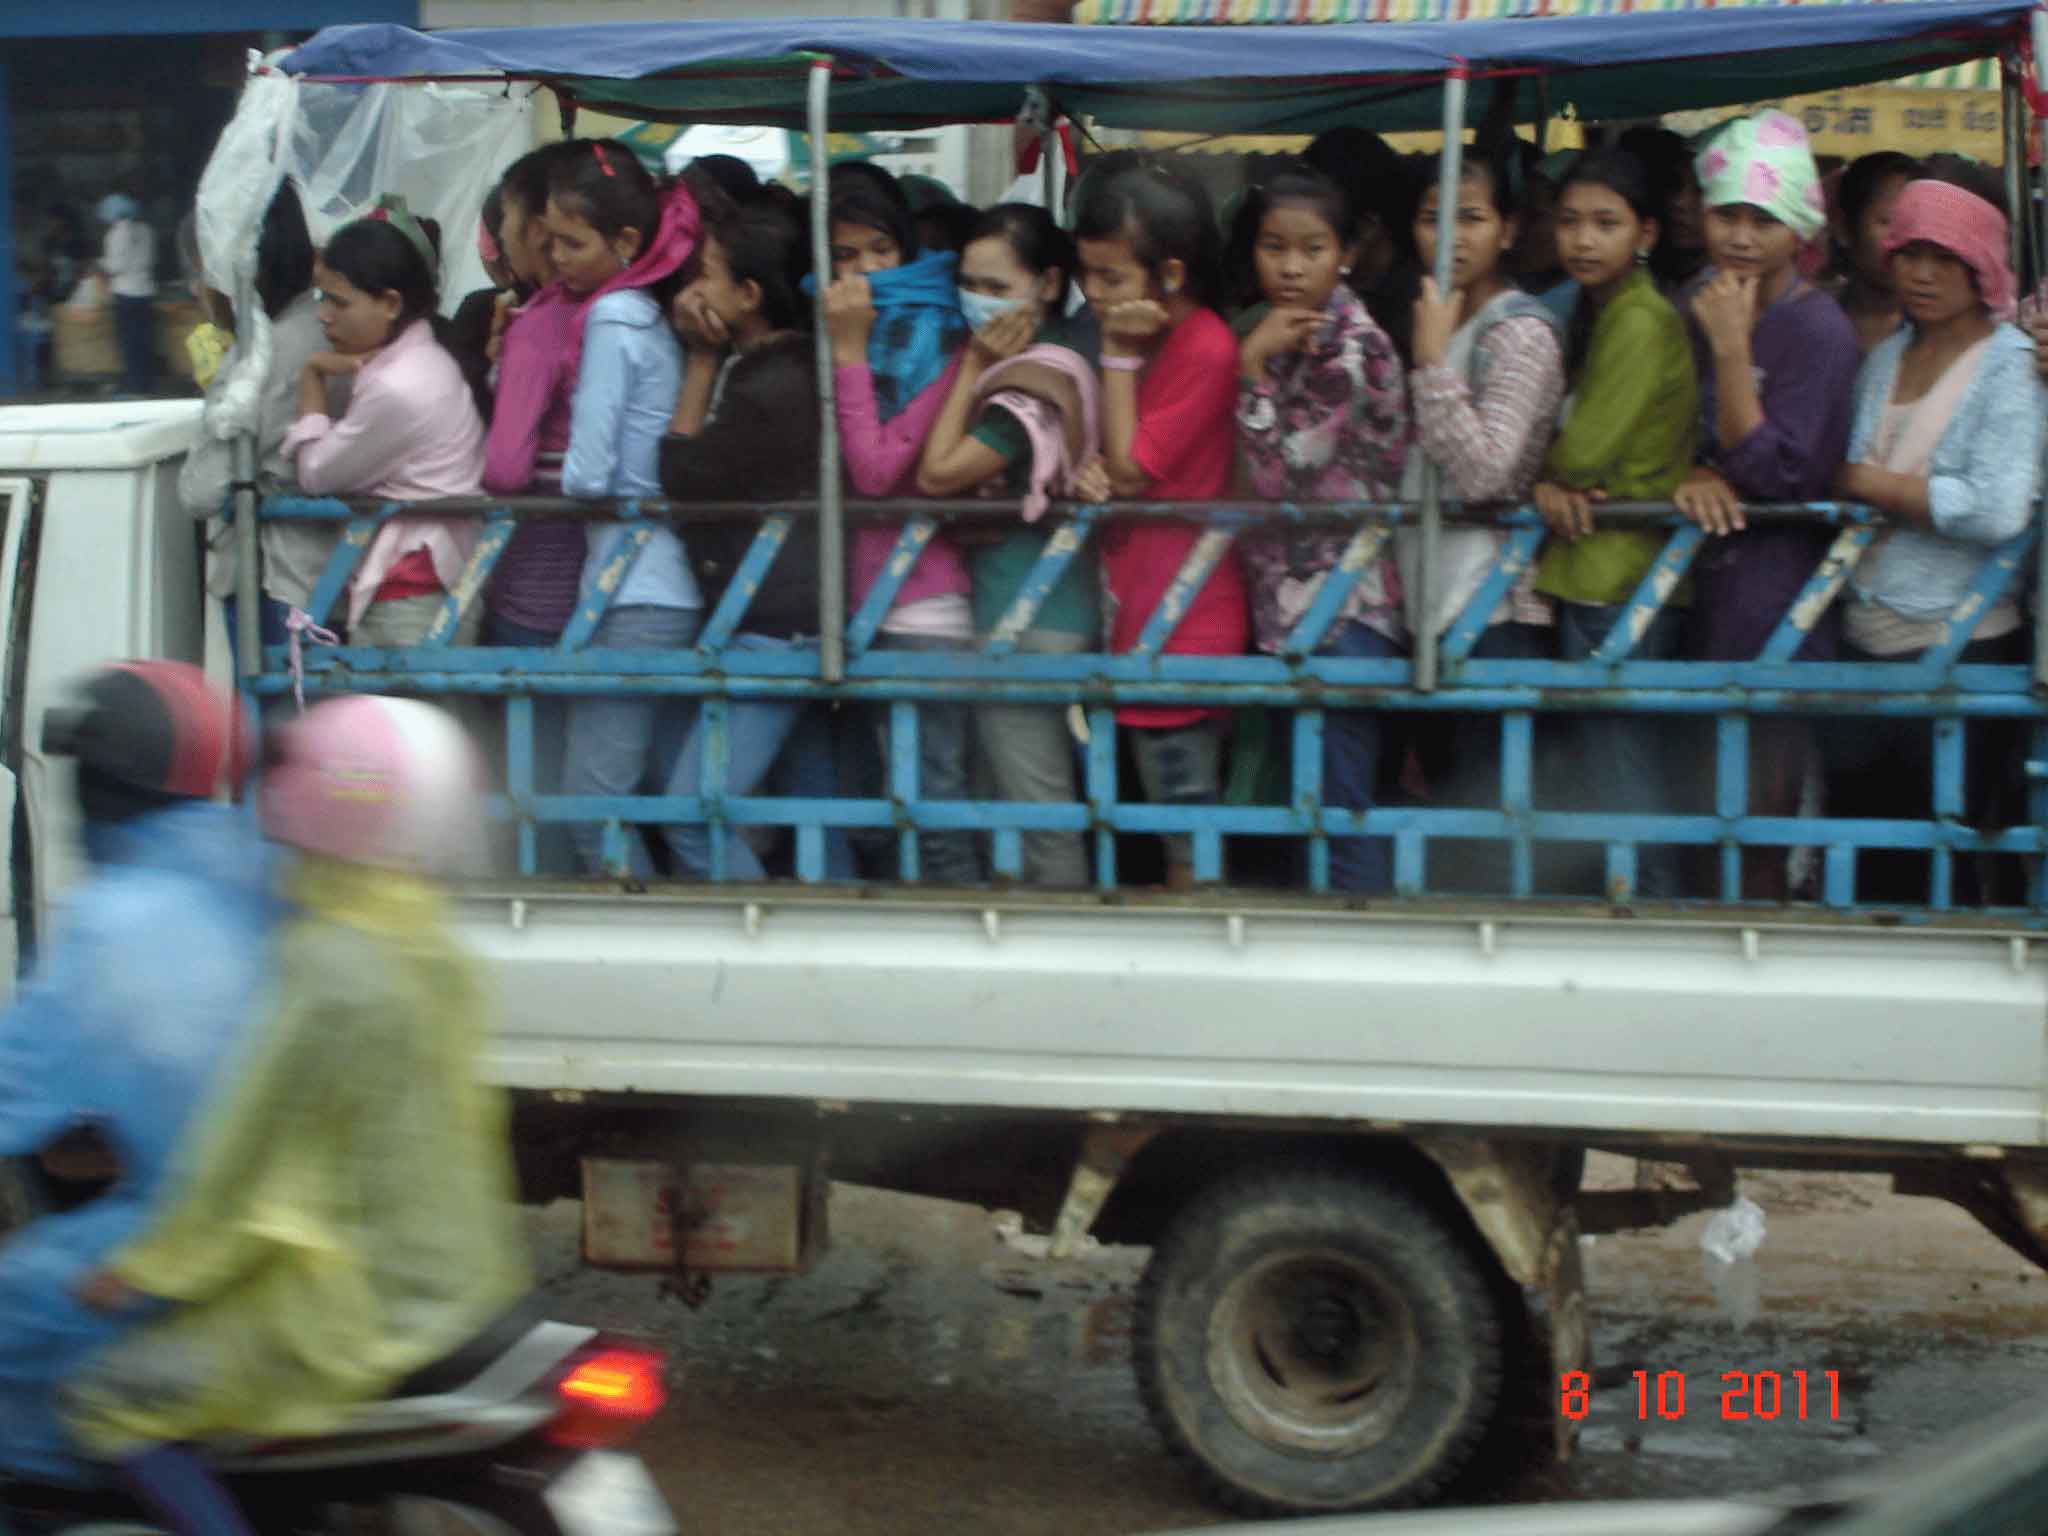 Workers from the Garment Factories on their way home 